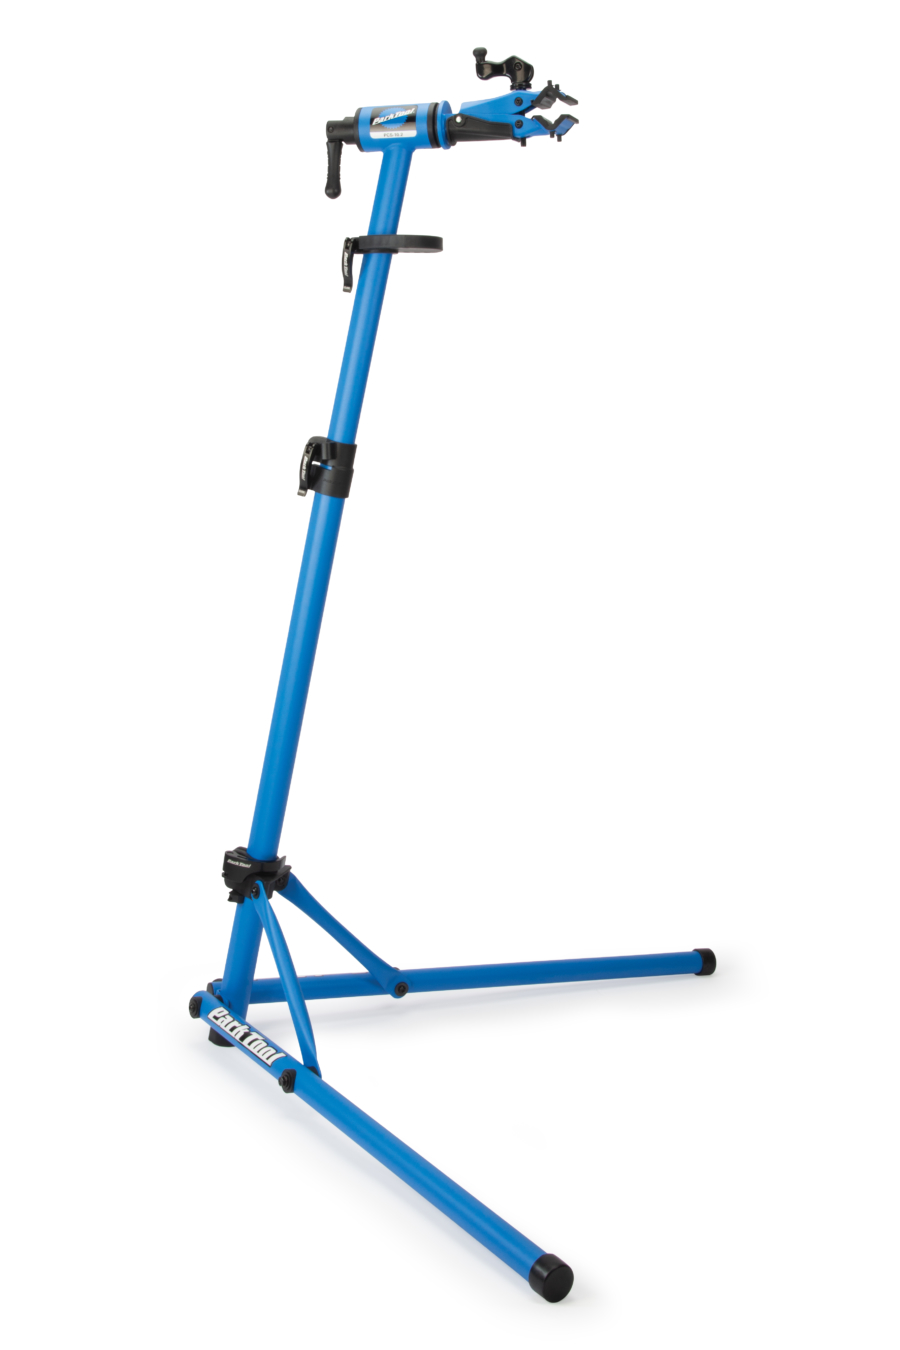 Deluxe Home Mechanic Repair Stand